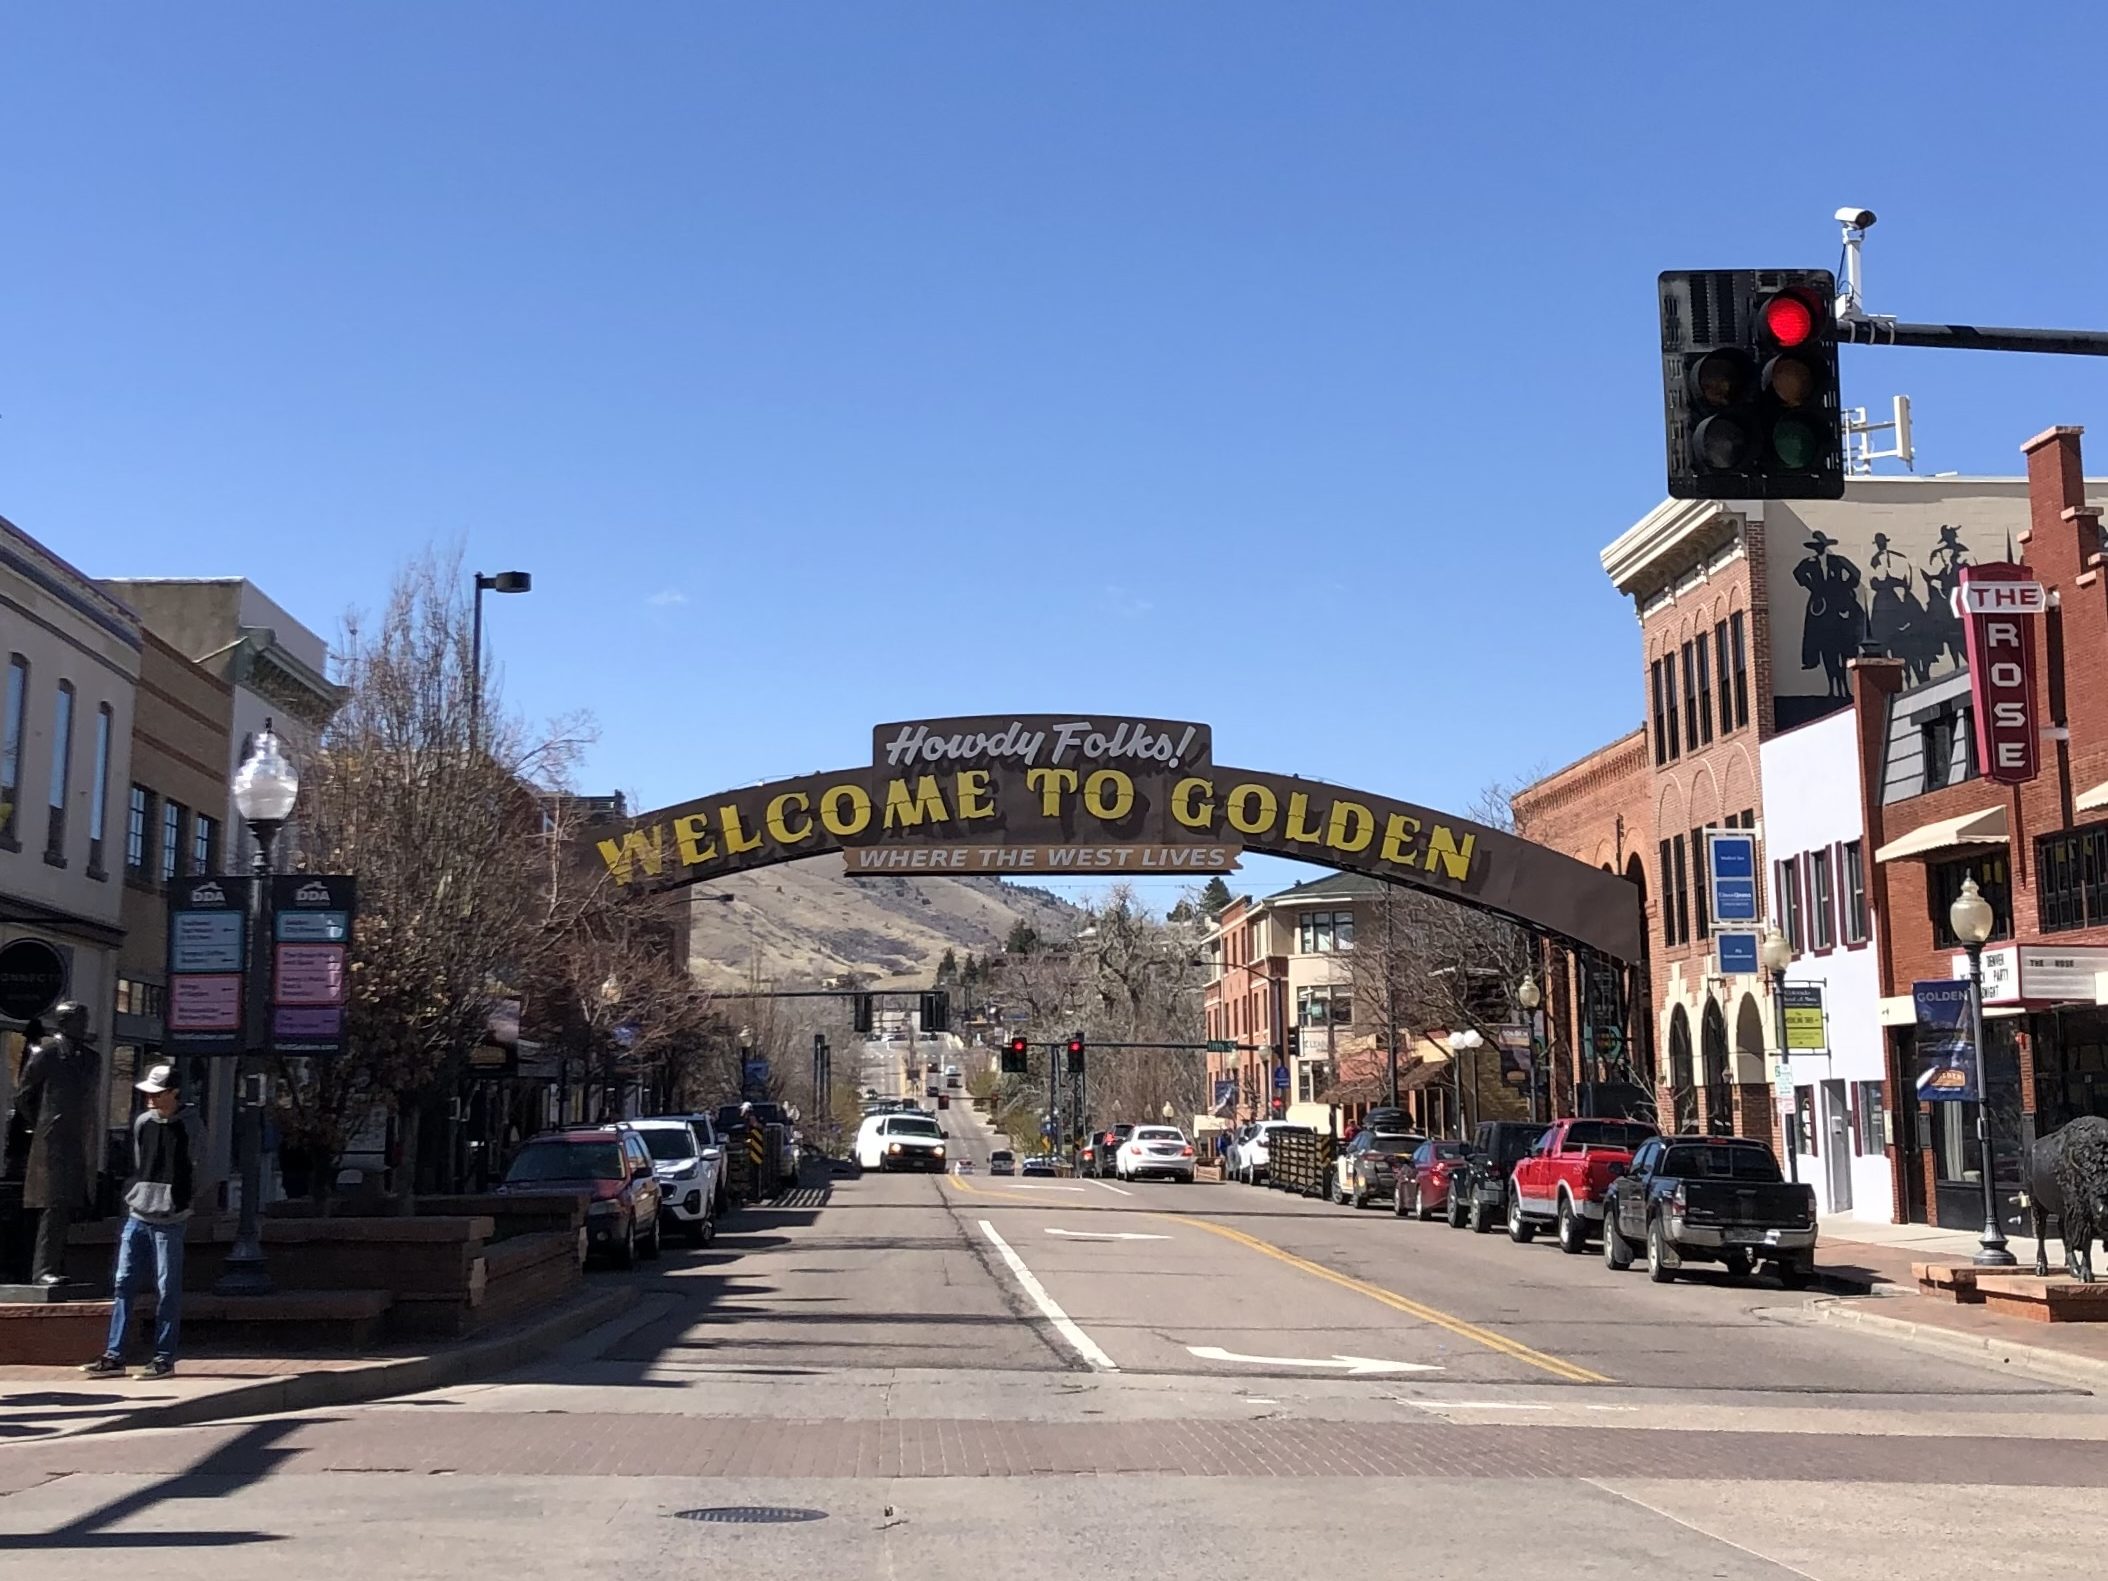 Welcome to Golden sign in downtown Golden, CO